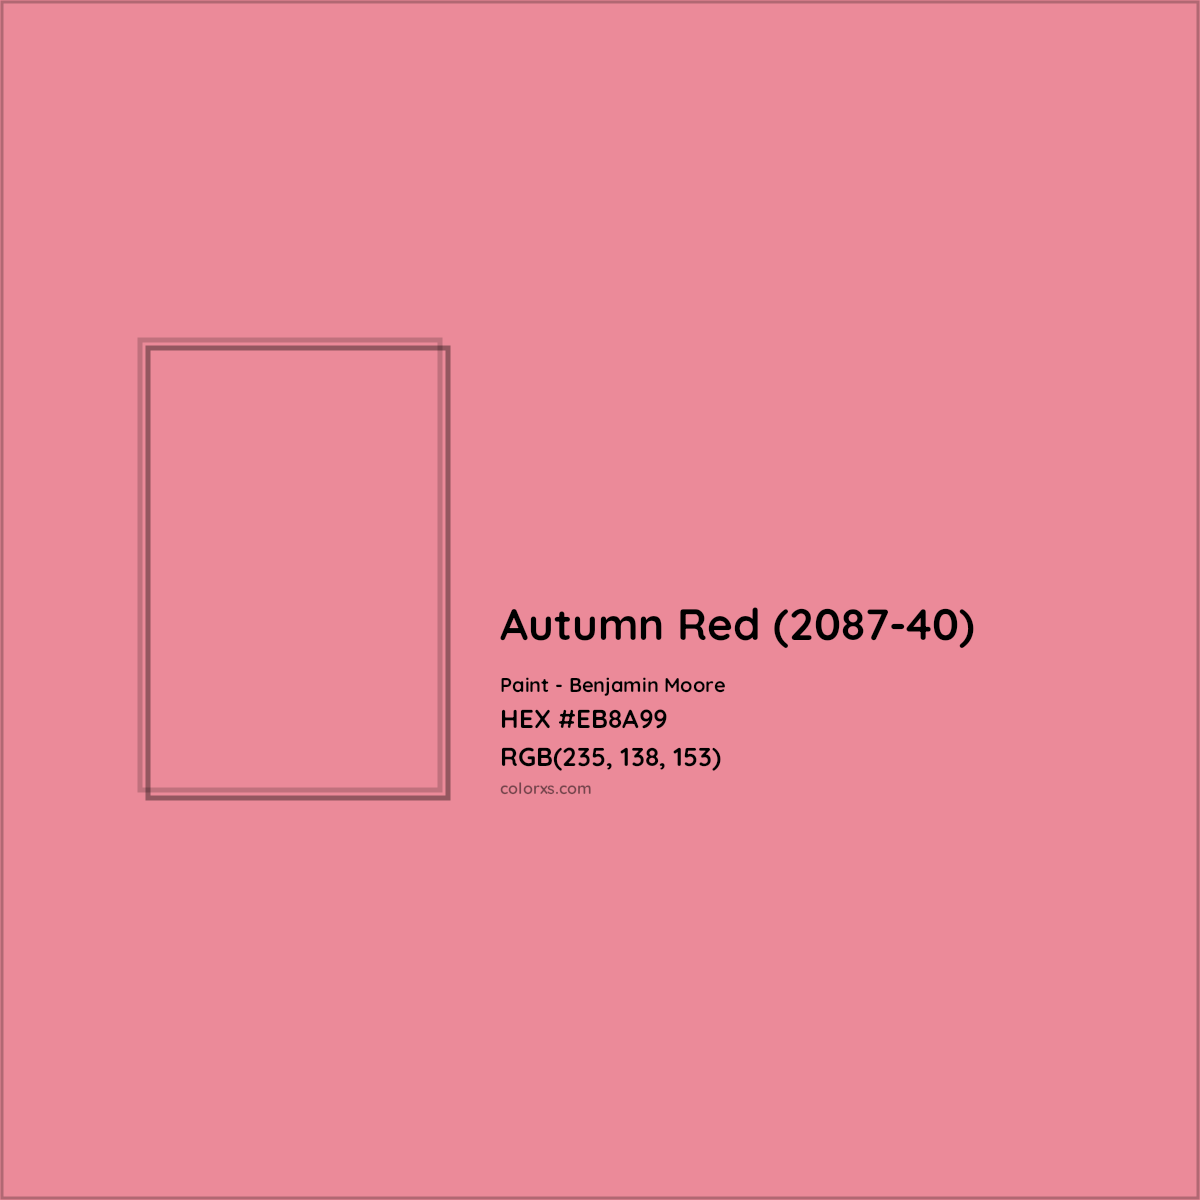 HEX #EB8A99 Autumn Red (2087-40) Paint Benjamin Moore - Color Code